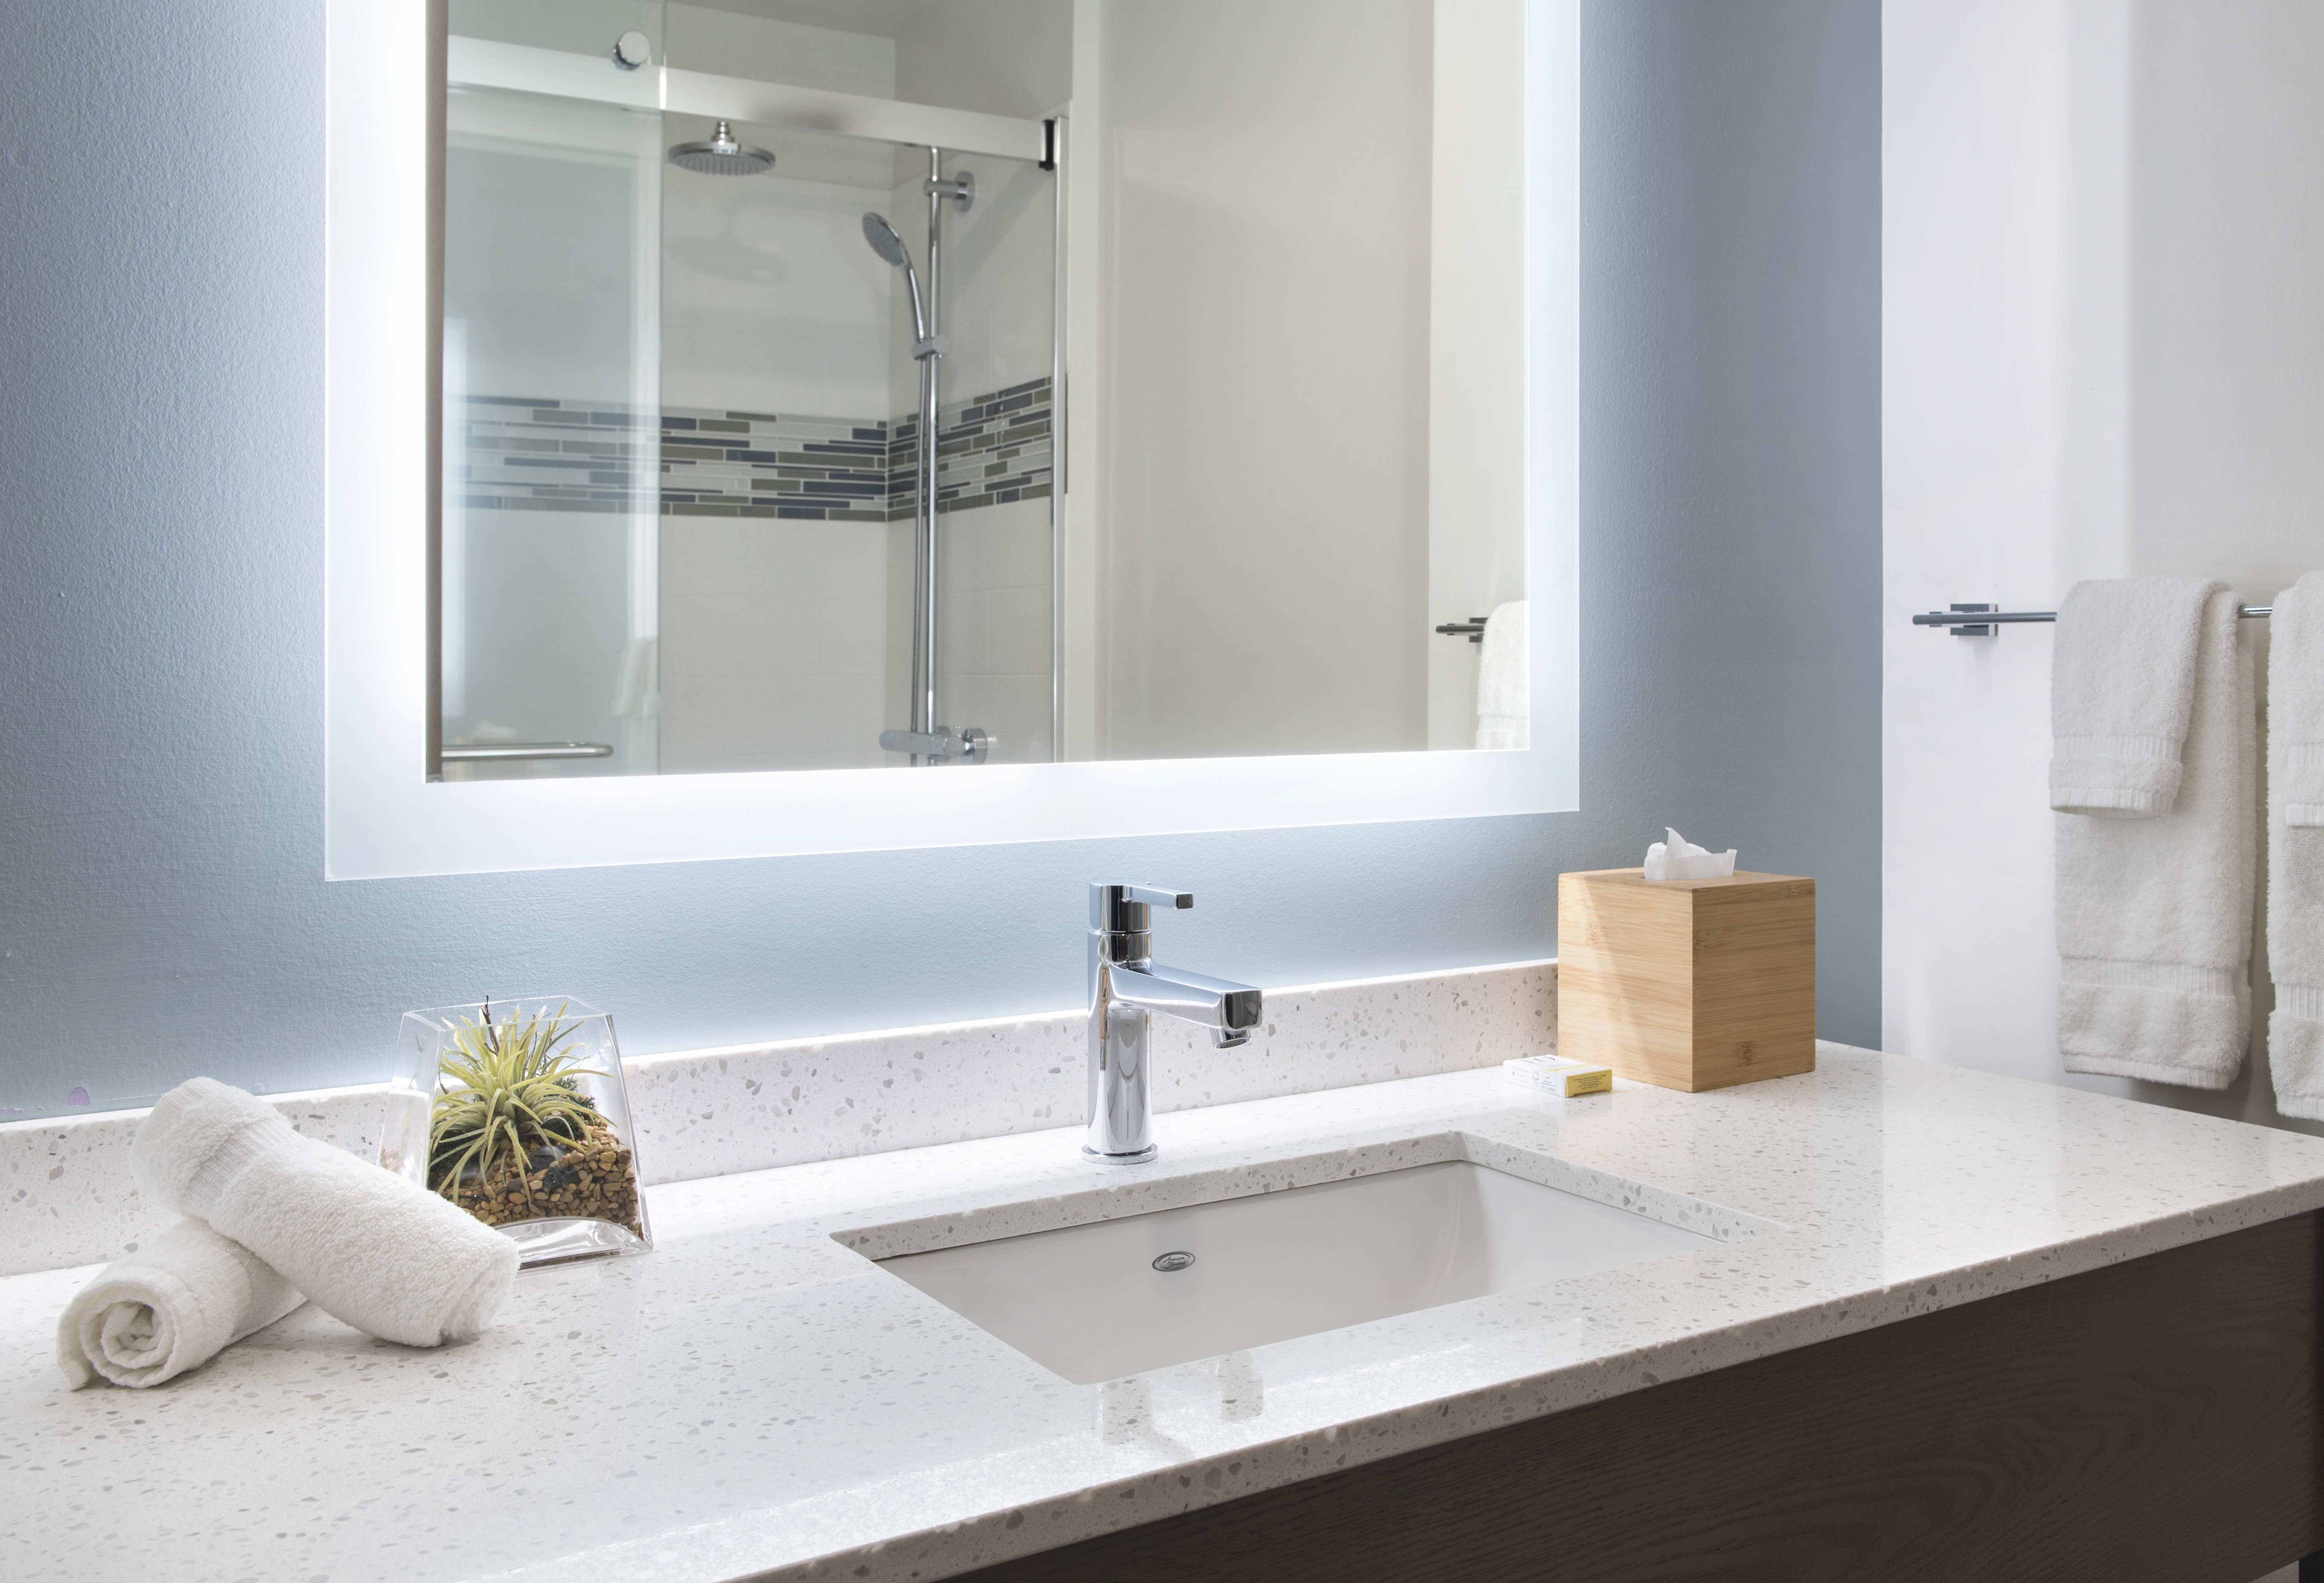 Guest baths feature spa-inspired showers & upscale amenities.